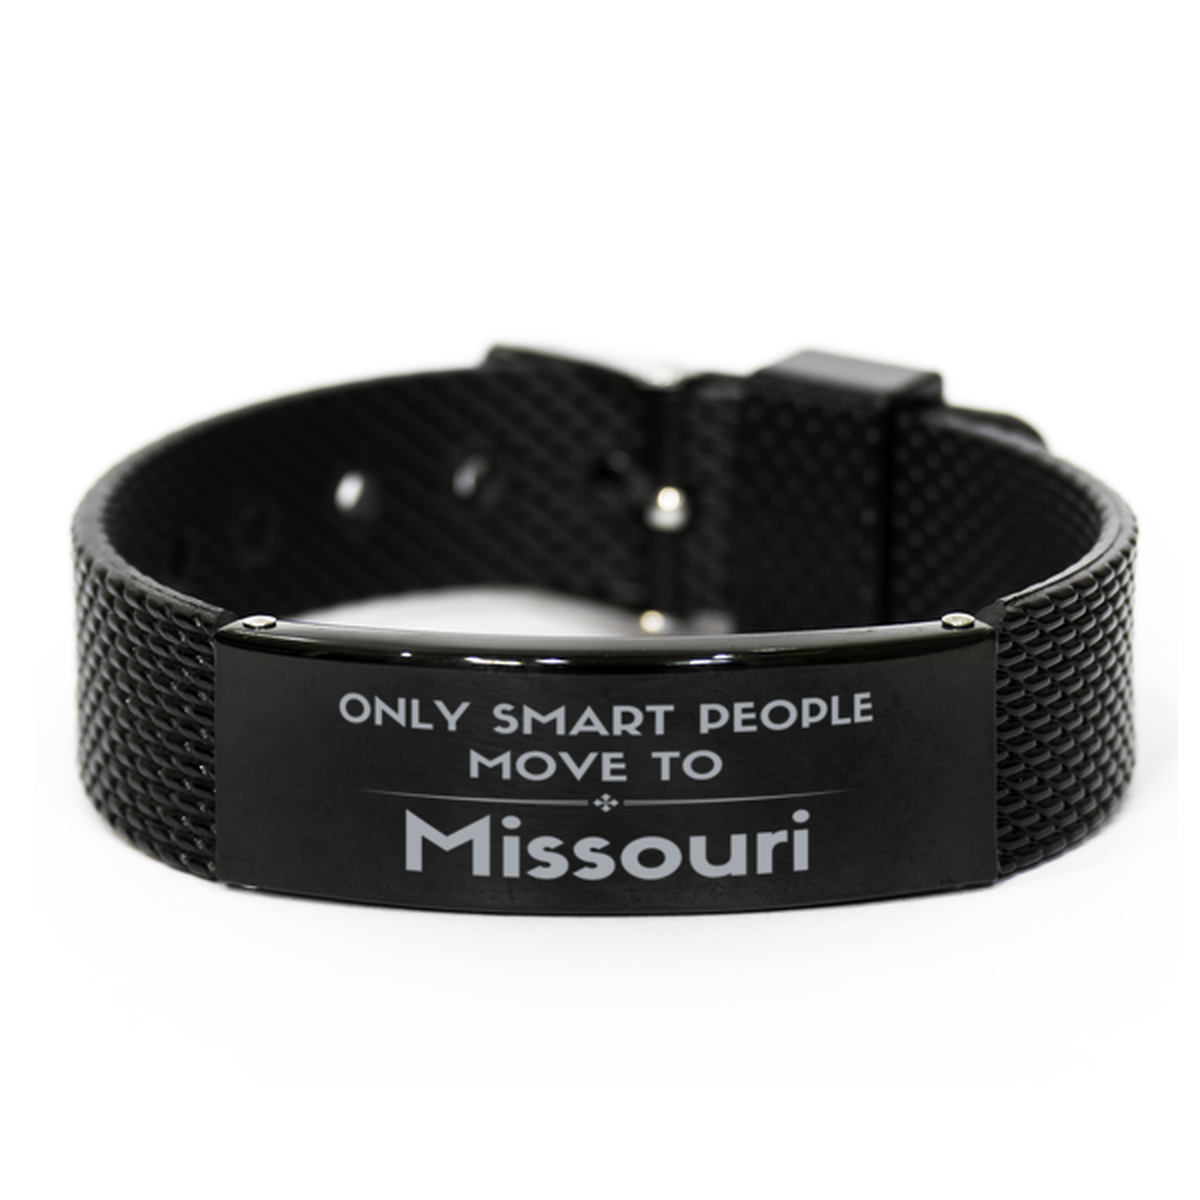 Only smart people move to Missouri Black Shark Mesh Bracelet, Gag Gifts For Missouri, Move to Missouri Gifts for Friends Coworker Funny Saying Quote